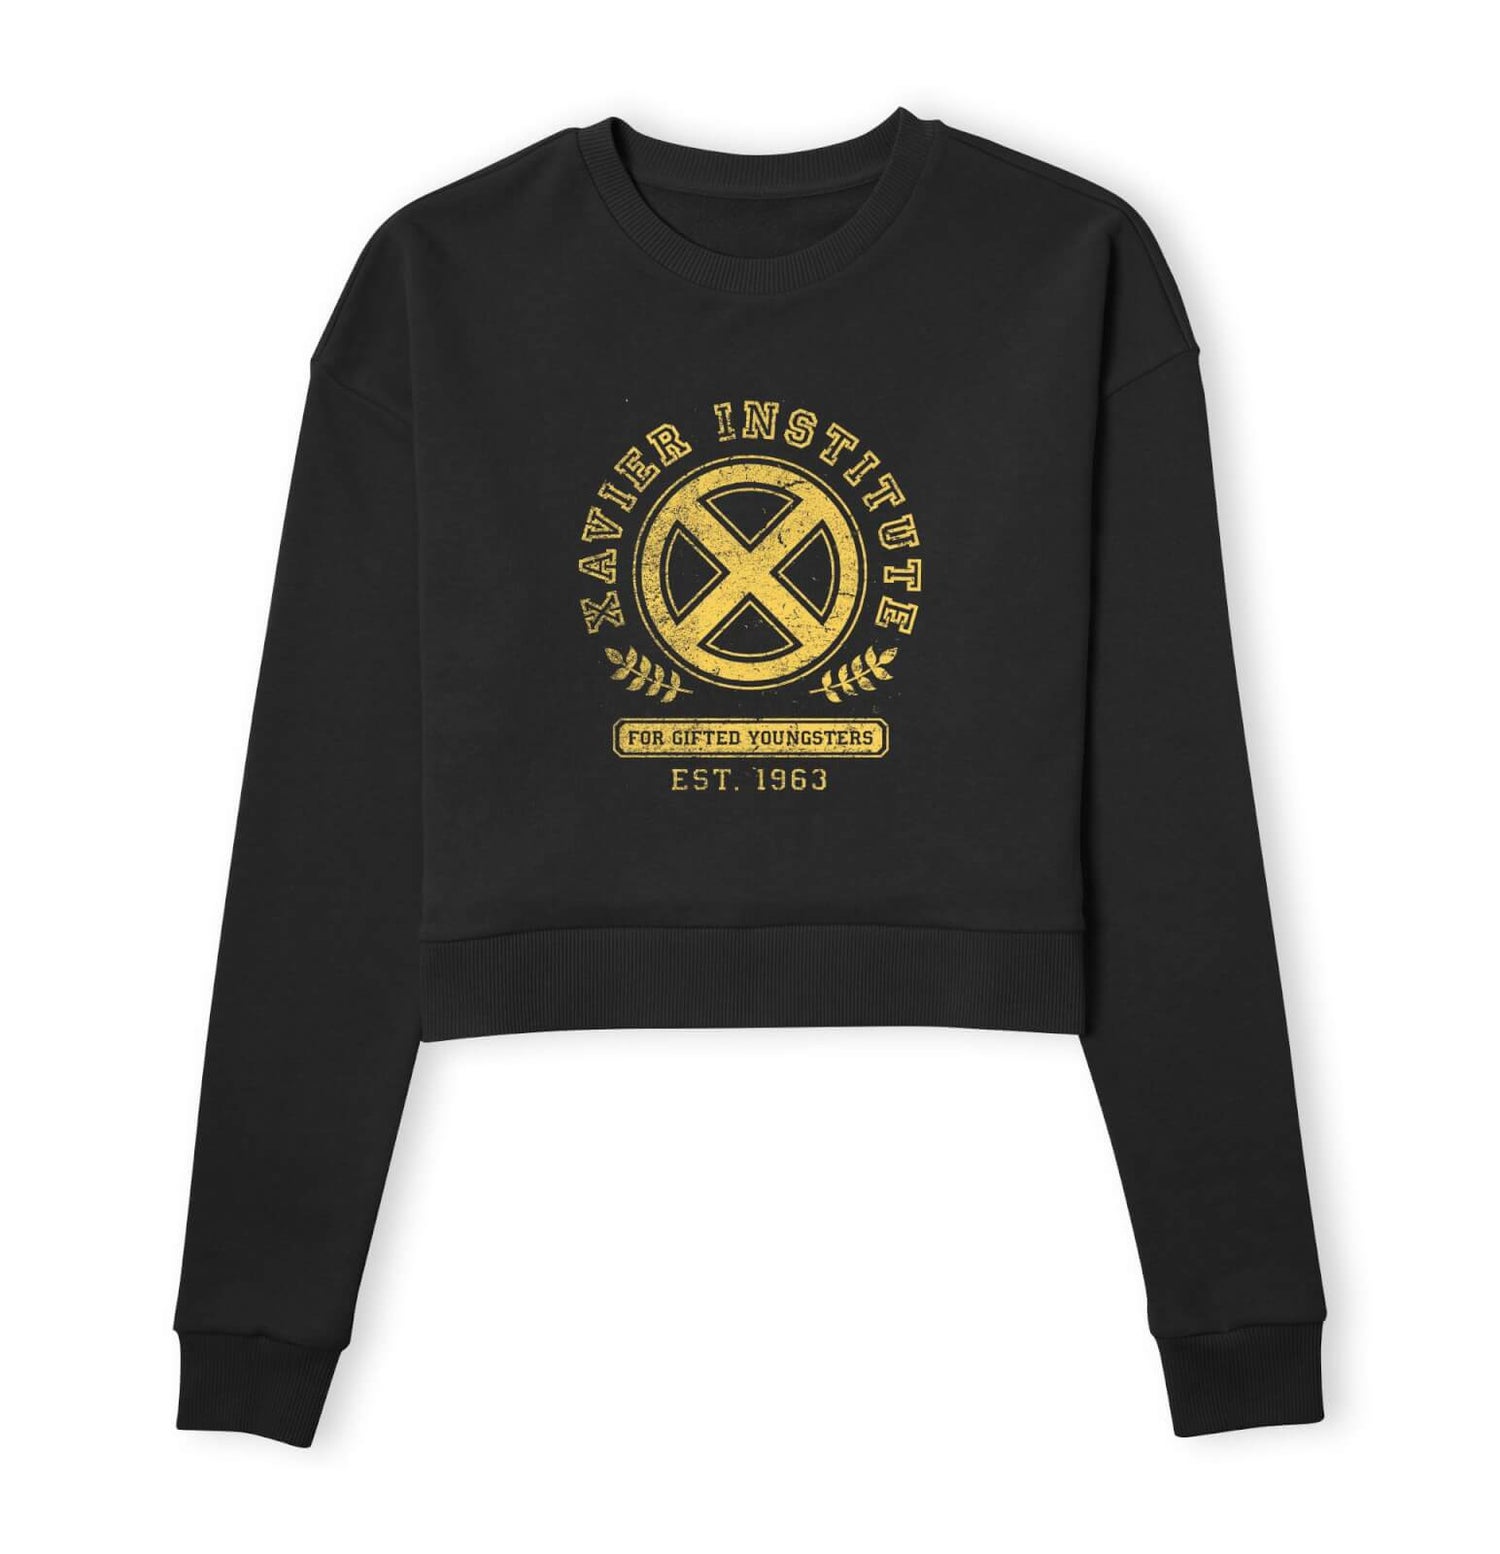 X-Men Xavier Institute For Gifted Youngsters Drk Women's Cropped Sweatshirt - Black